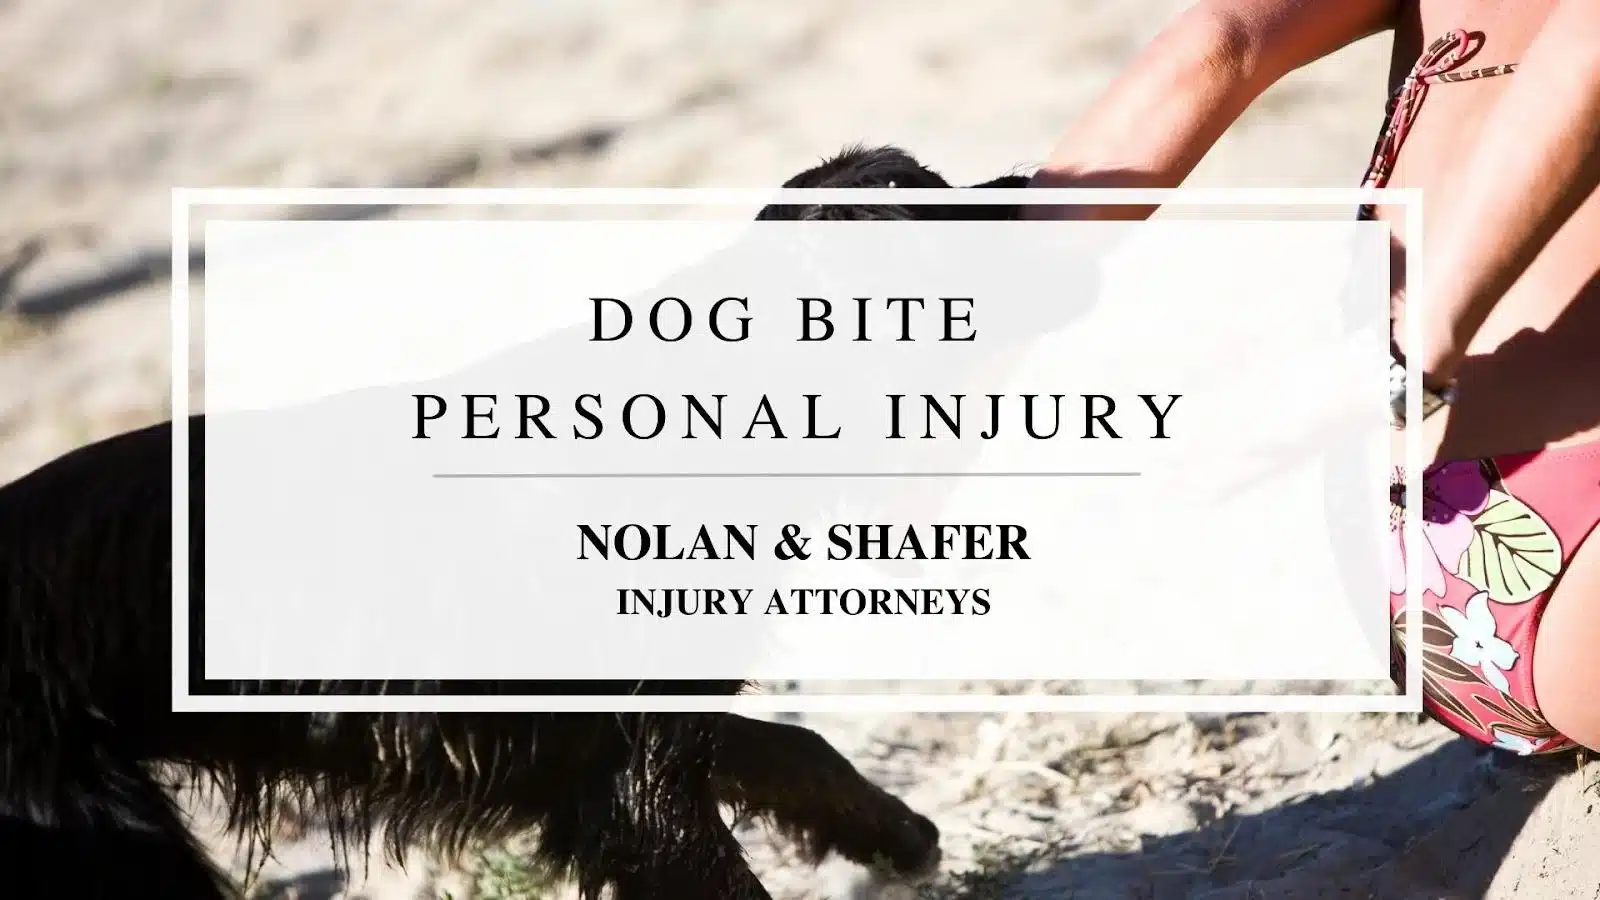 Featured image of the dog bite personal injury